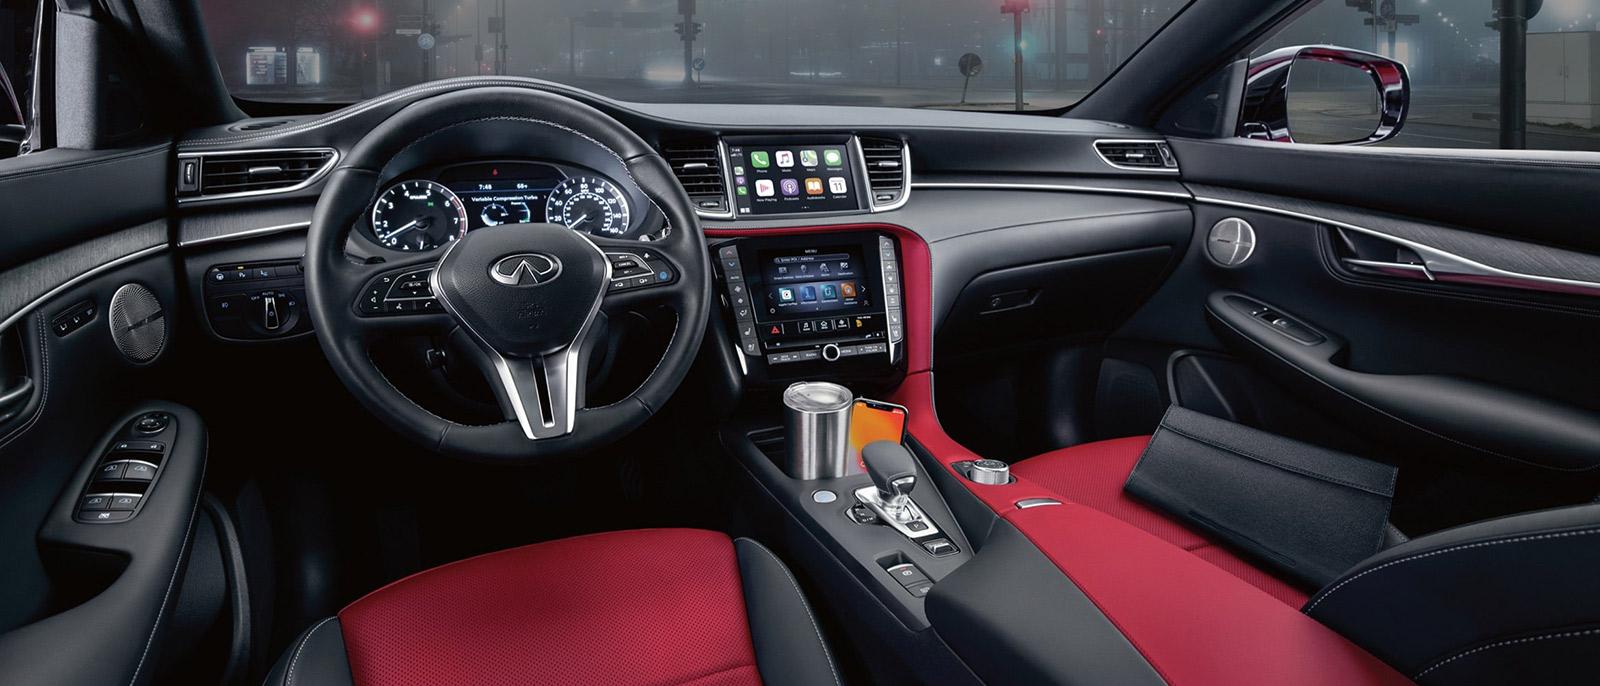 Interior view of the INFINITI QX55 featuring black upholstery with red accents.